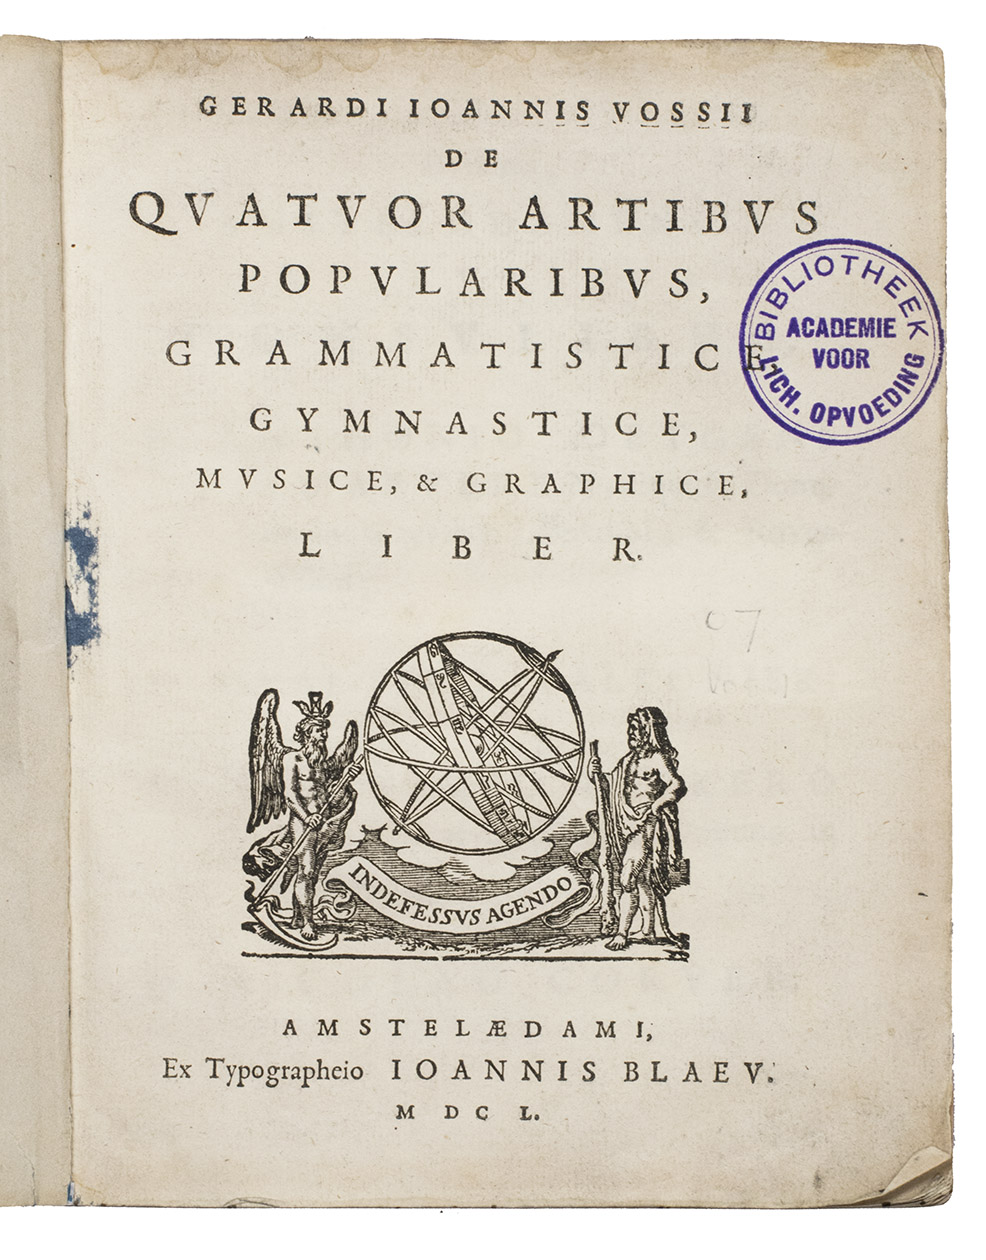 VOSSIUS, Gerardus Joannes. - De quatuor artibus popularibus, grammatistice, gymnastice, musice, & graphice, liber.Amsterdam, Johannes Blaeu, 1650. Small 4to. With Blaeus woodcut device on the title-page, 3 woodcut decorated initials. Later blue paper wrappers, title label pasted on spine.